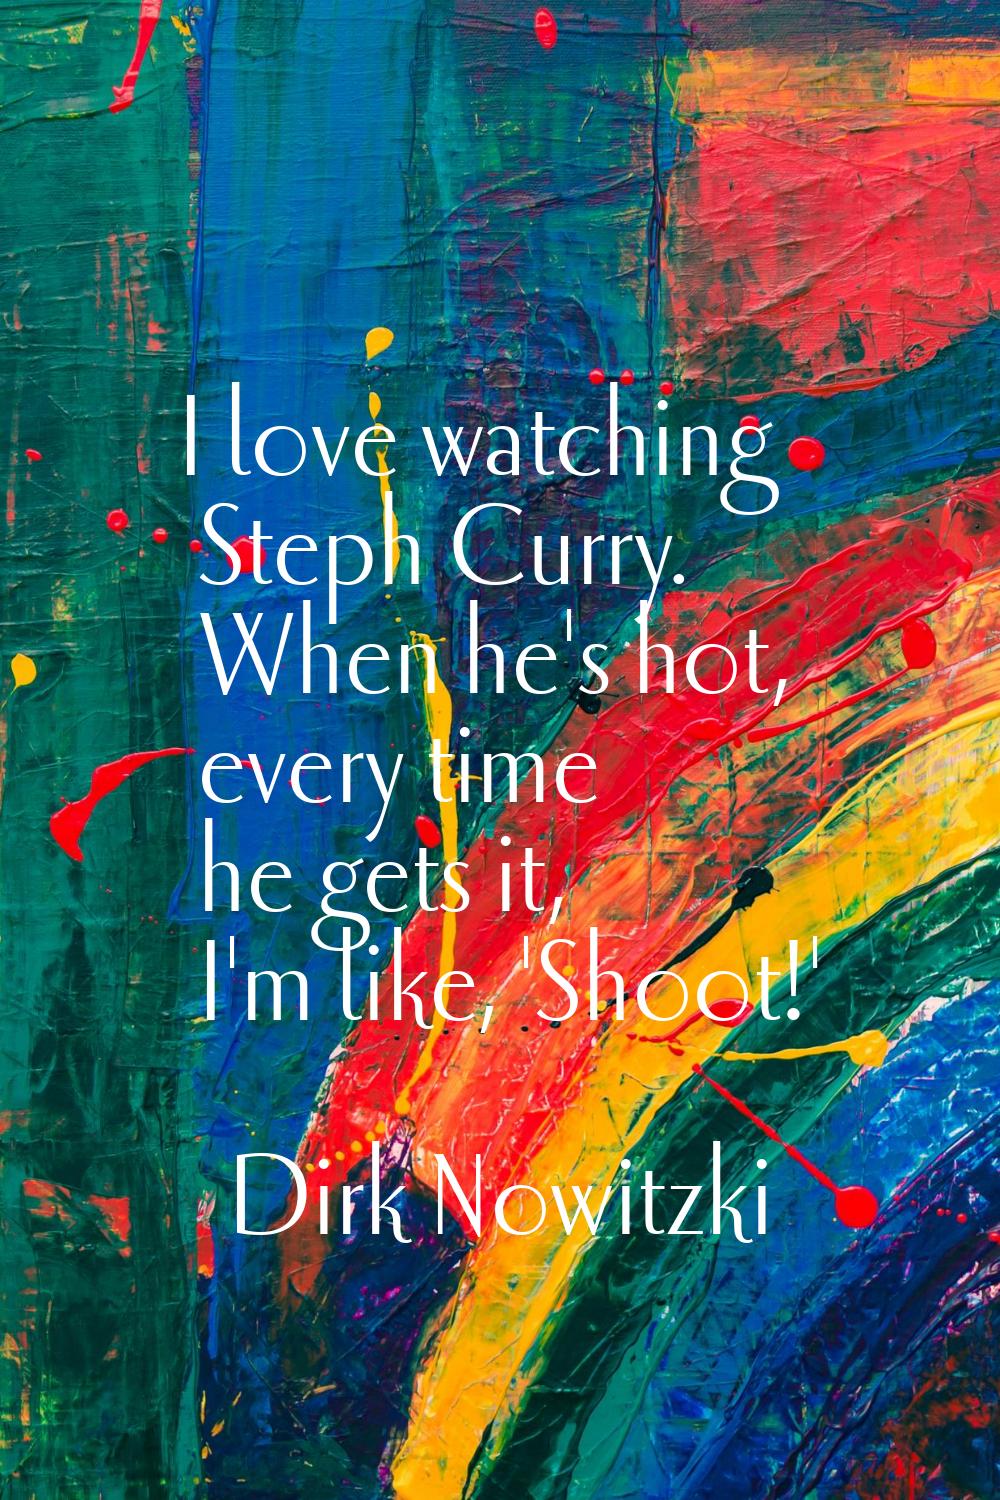 I love watching Steph Curry. When he's hot, every time he gets it, I'm like, 'Shoot!'